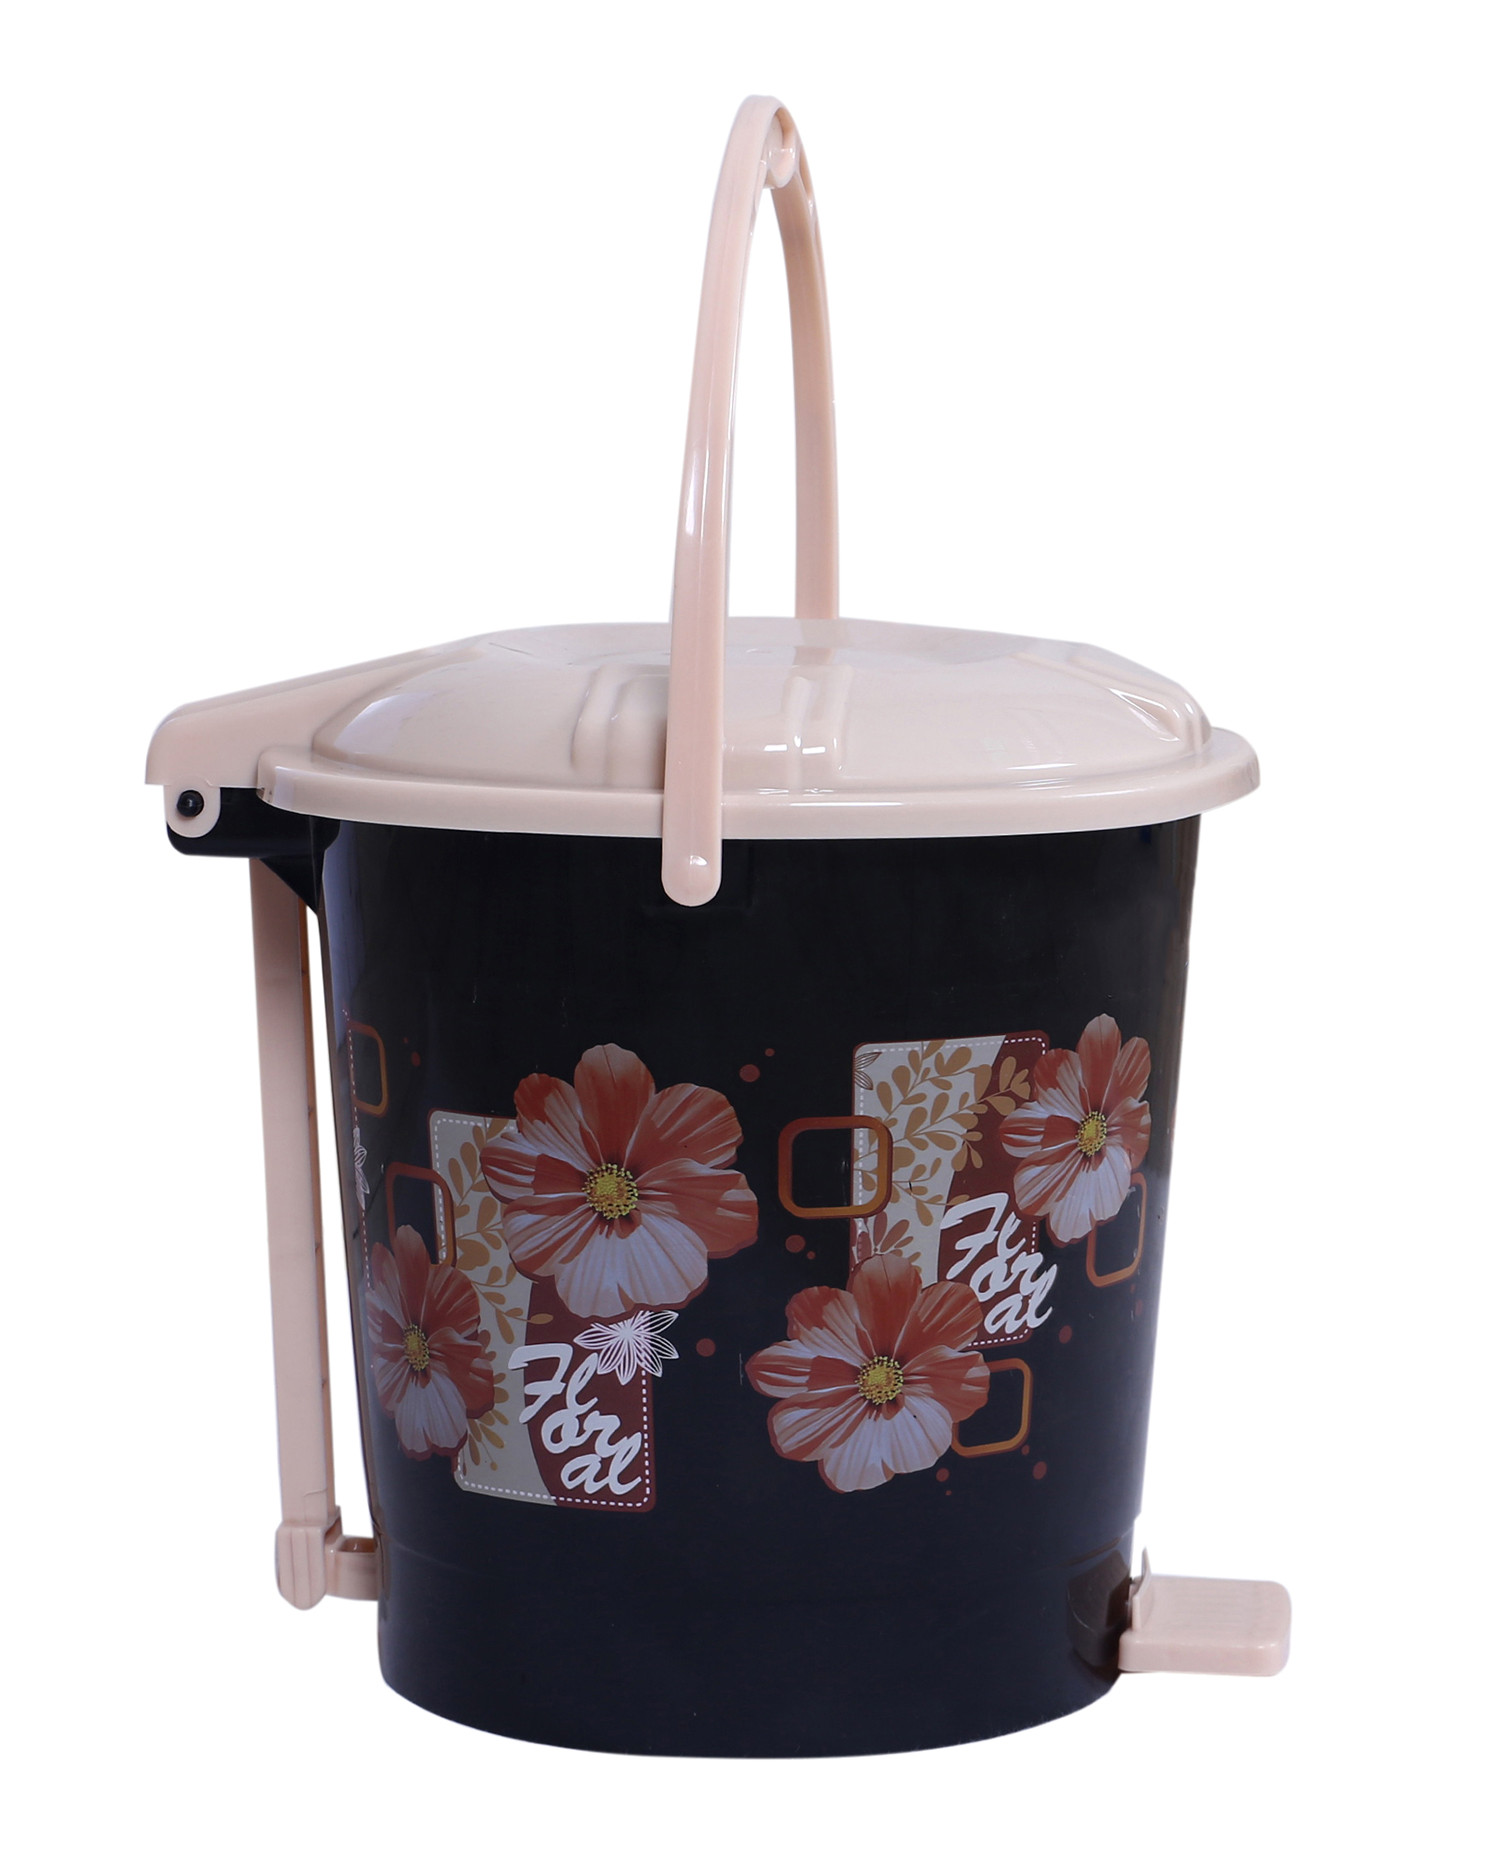 Kuber Industries Durable Floral Print Plastic Pedal Dustbin|Waste Bin|Trash Can For Kitchen & Home With Handle,10 Litre (Black)